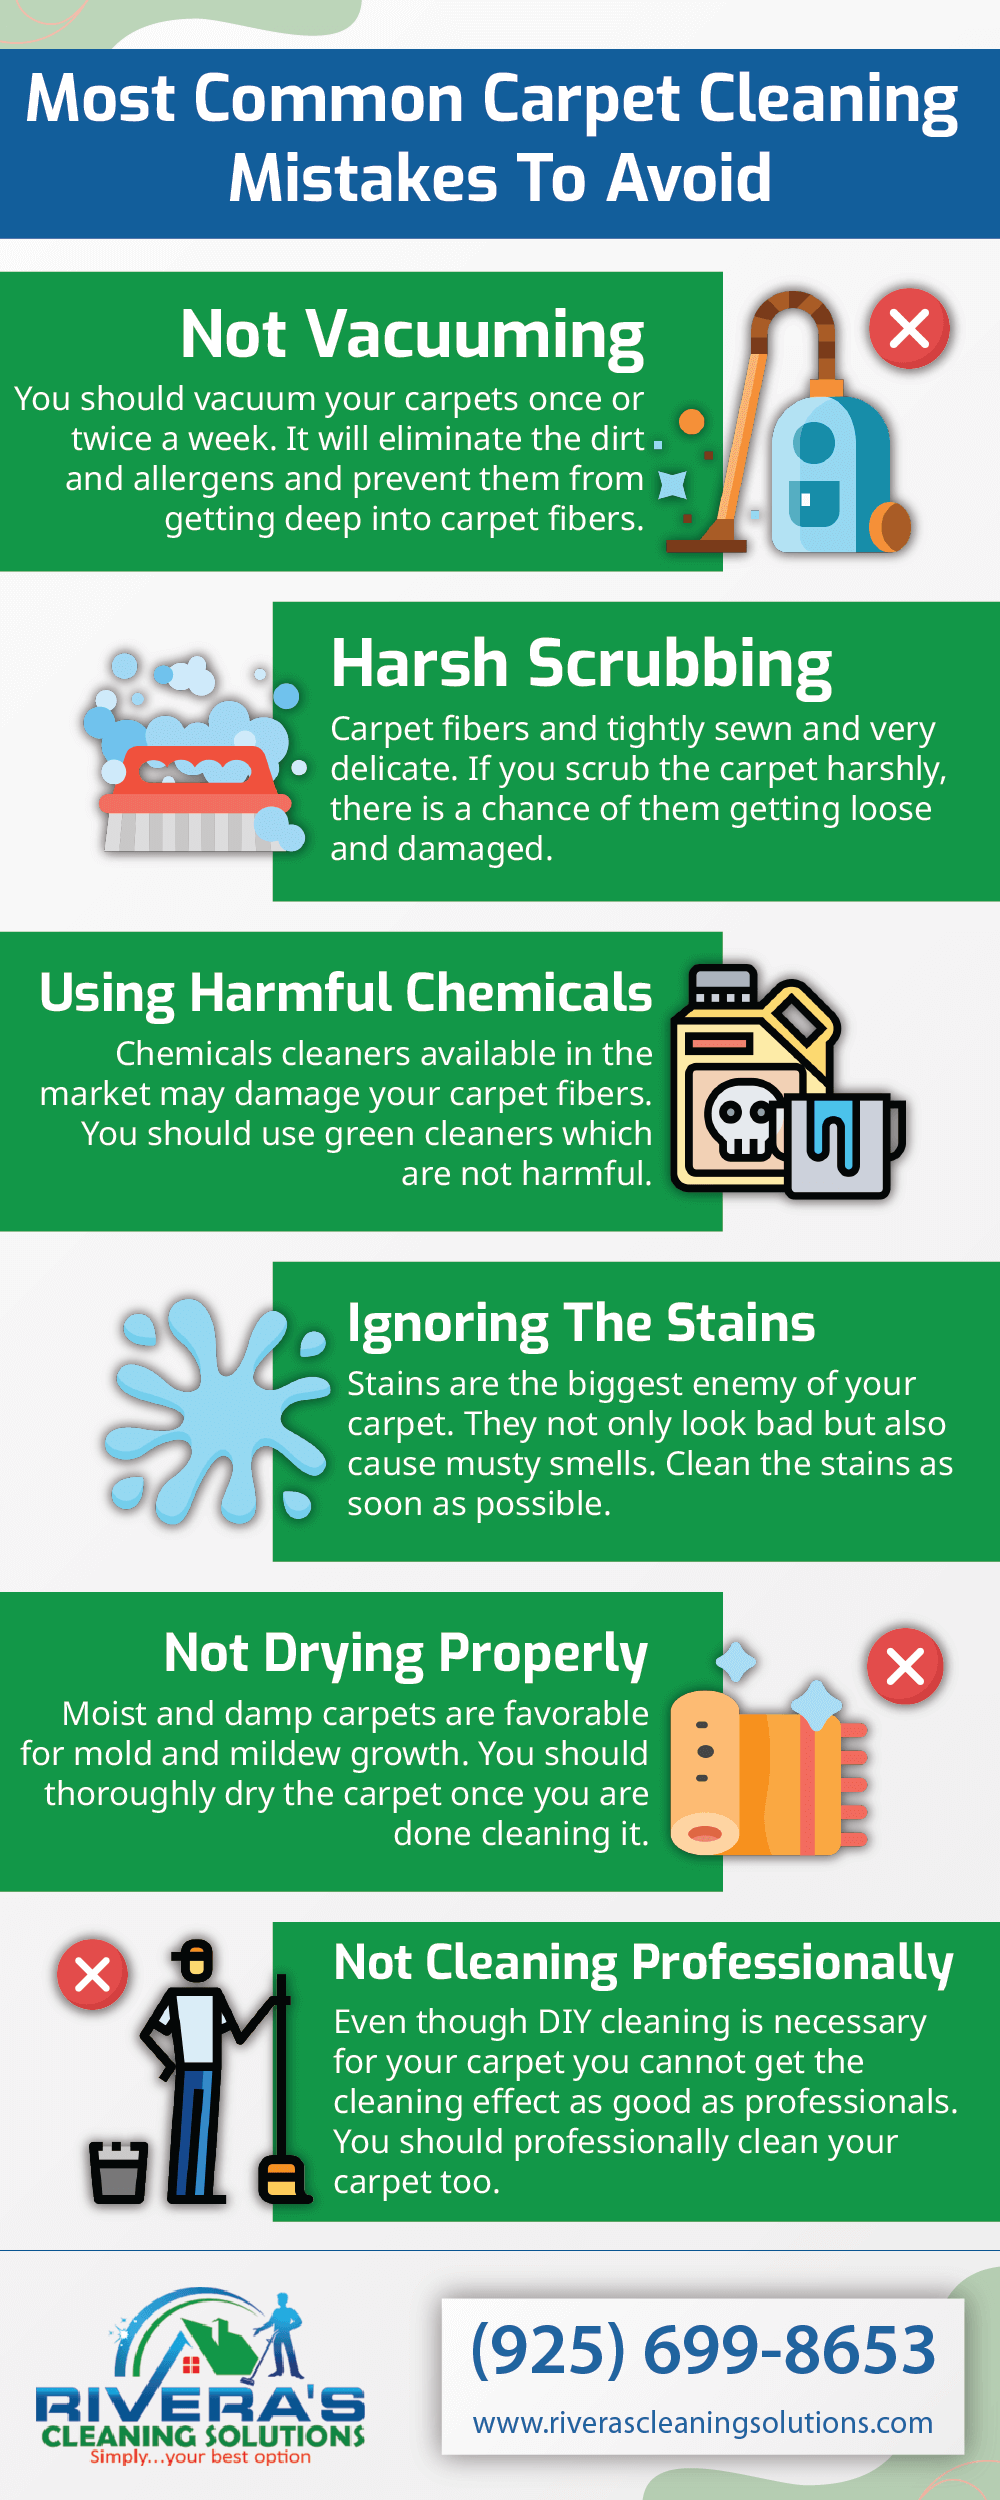 Most Common Carpet Cleaning Mistakes To Avoid